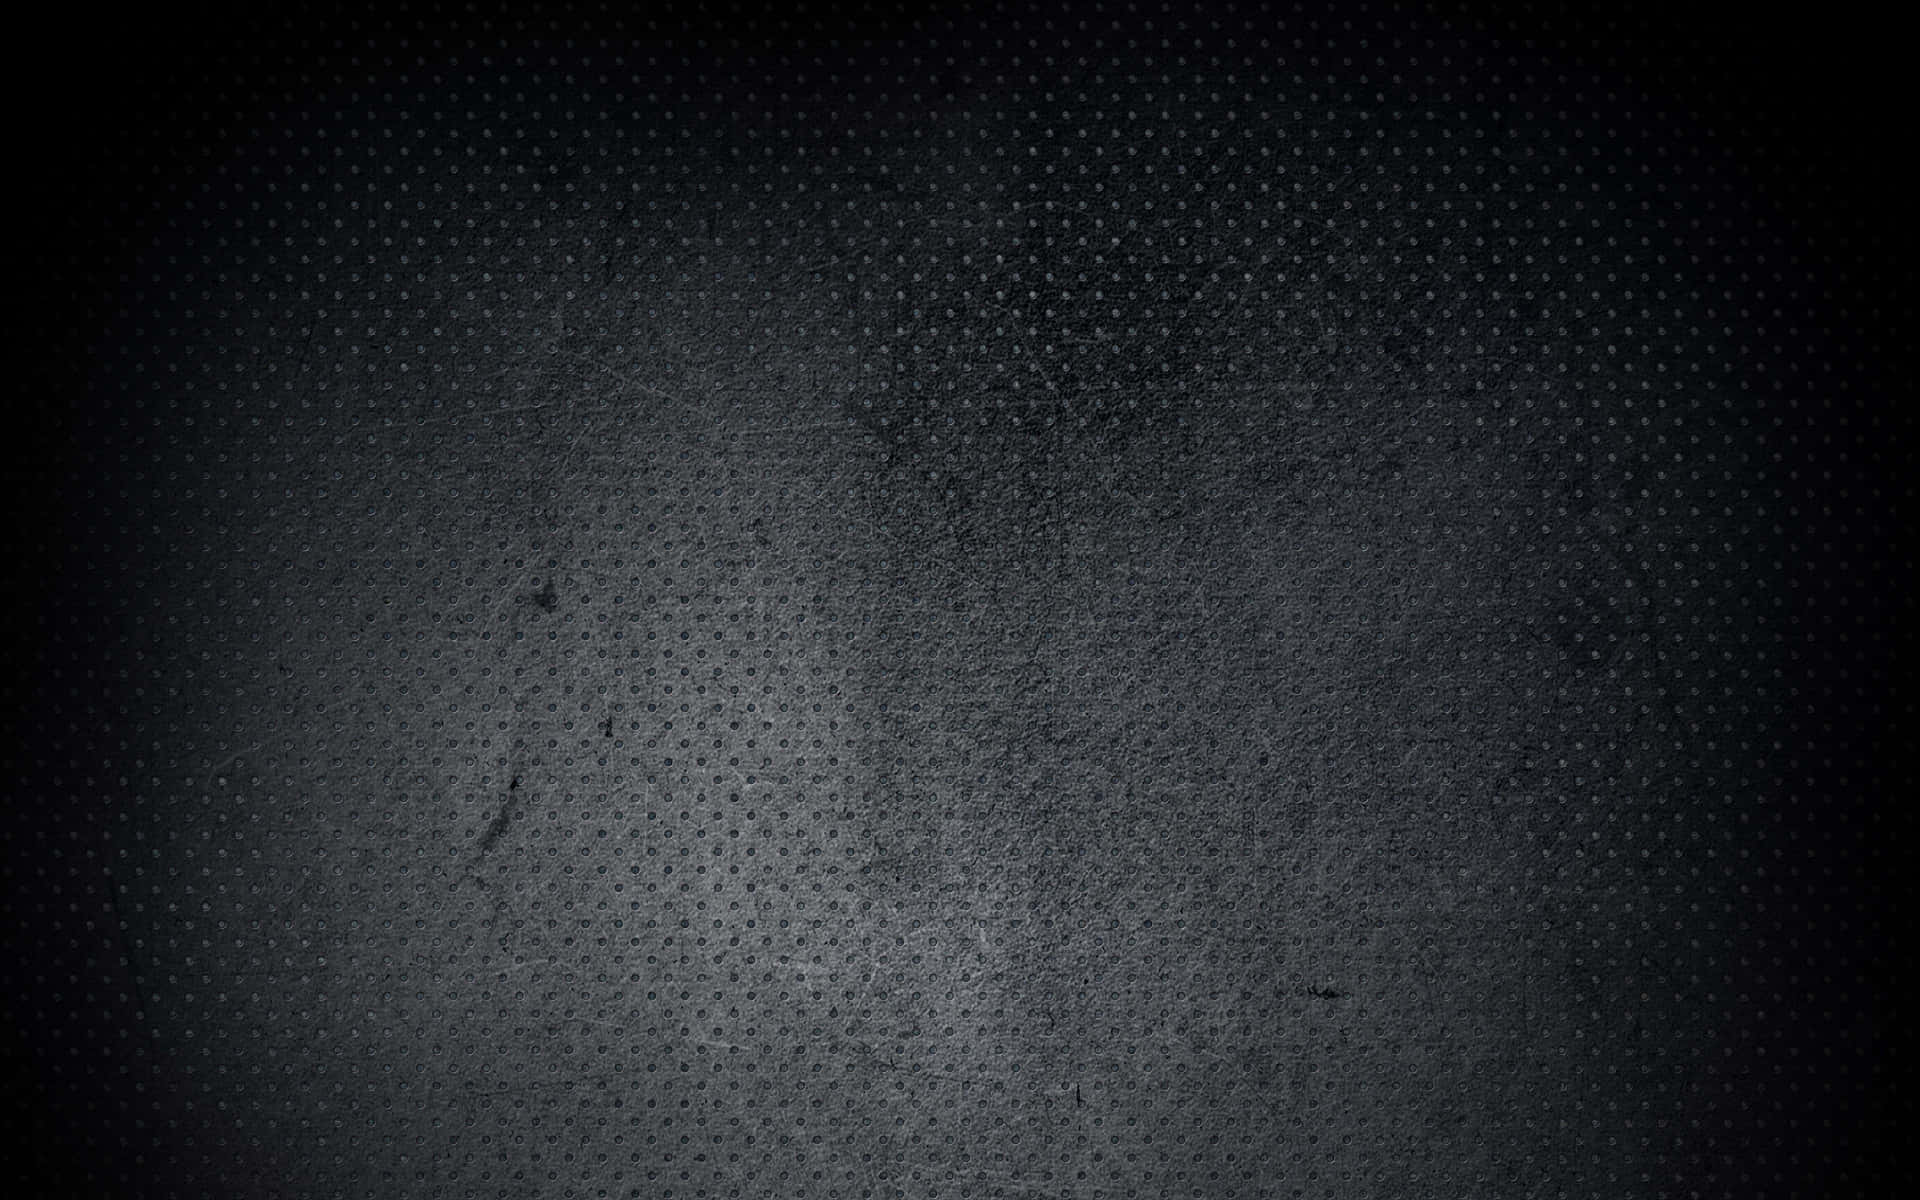 An edgy black grunge background with an urban vibe.